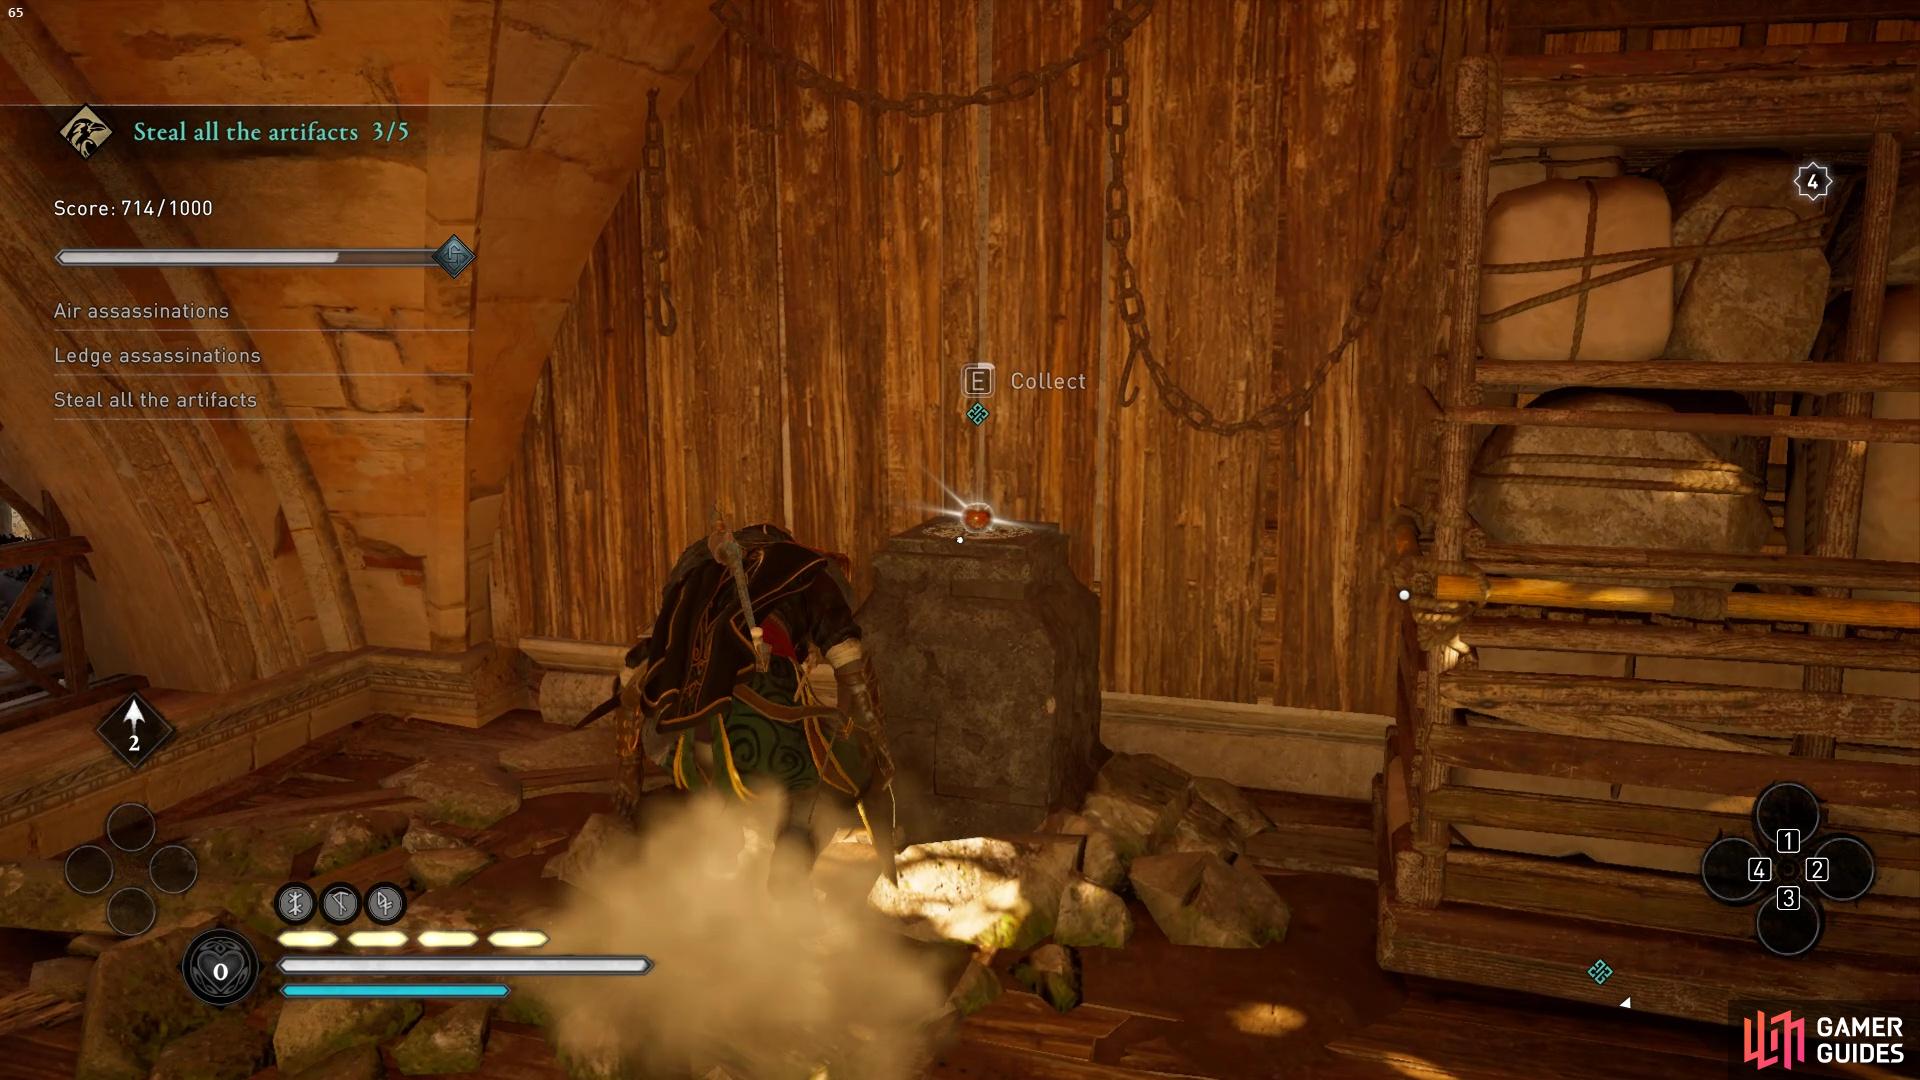 You'll be able to grab an artifact from the room once you've exploded the oil vases and made a hole in the floor.